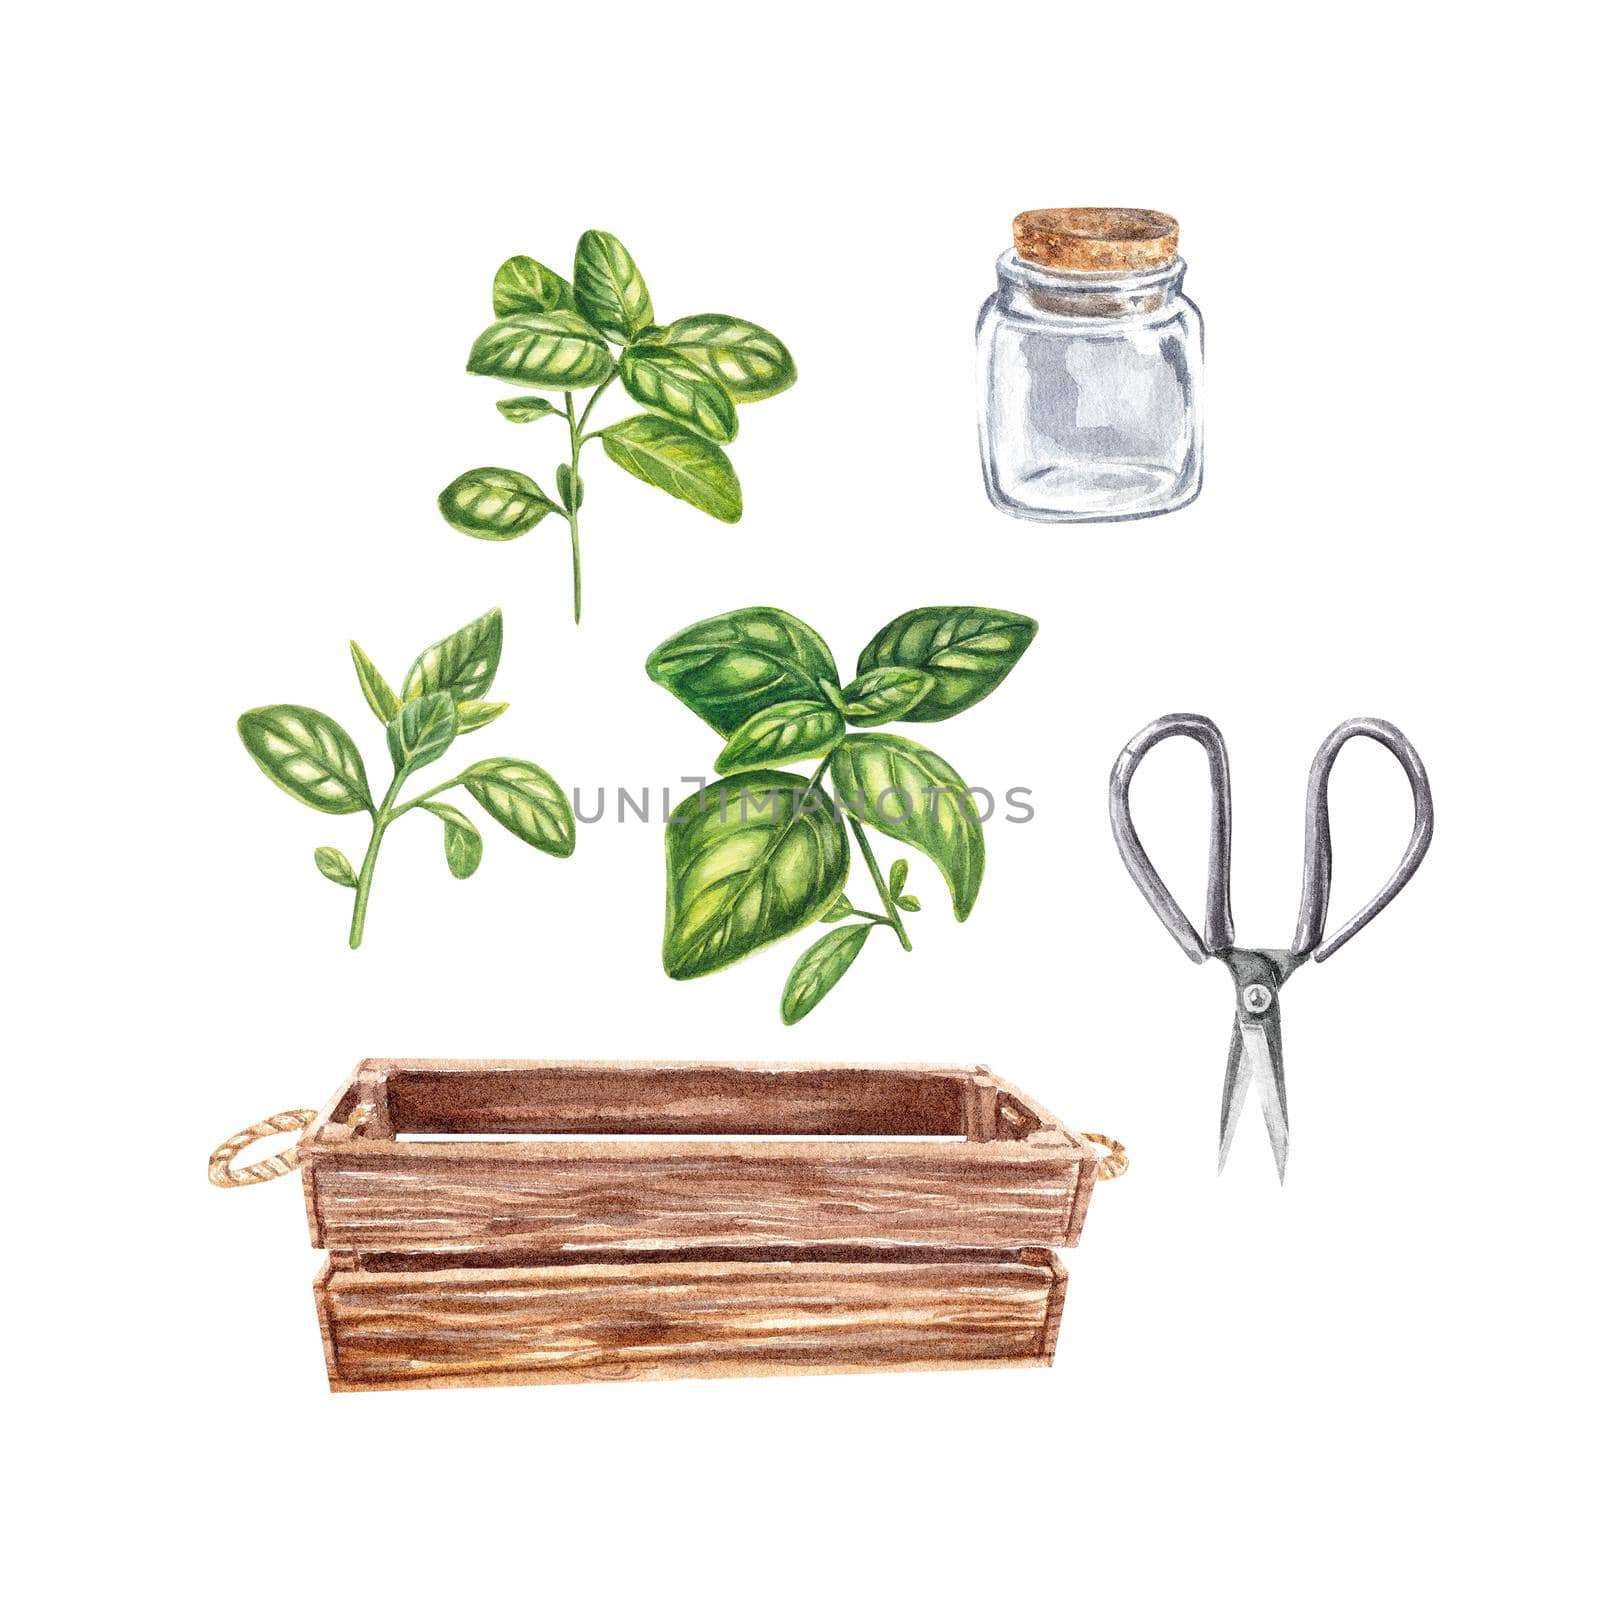 Provencal herbs: basil, rosemary, cumin, marjoram. Watercolor illustration on a white background. kitchen spices. Homemade spicy herbs. illustration is suitable for booklets, restaurant menus, design. by NastyaChe